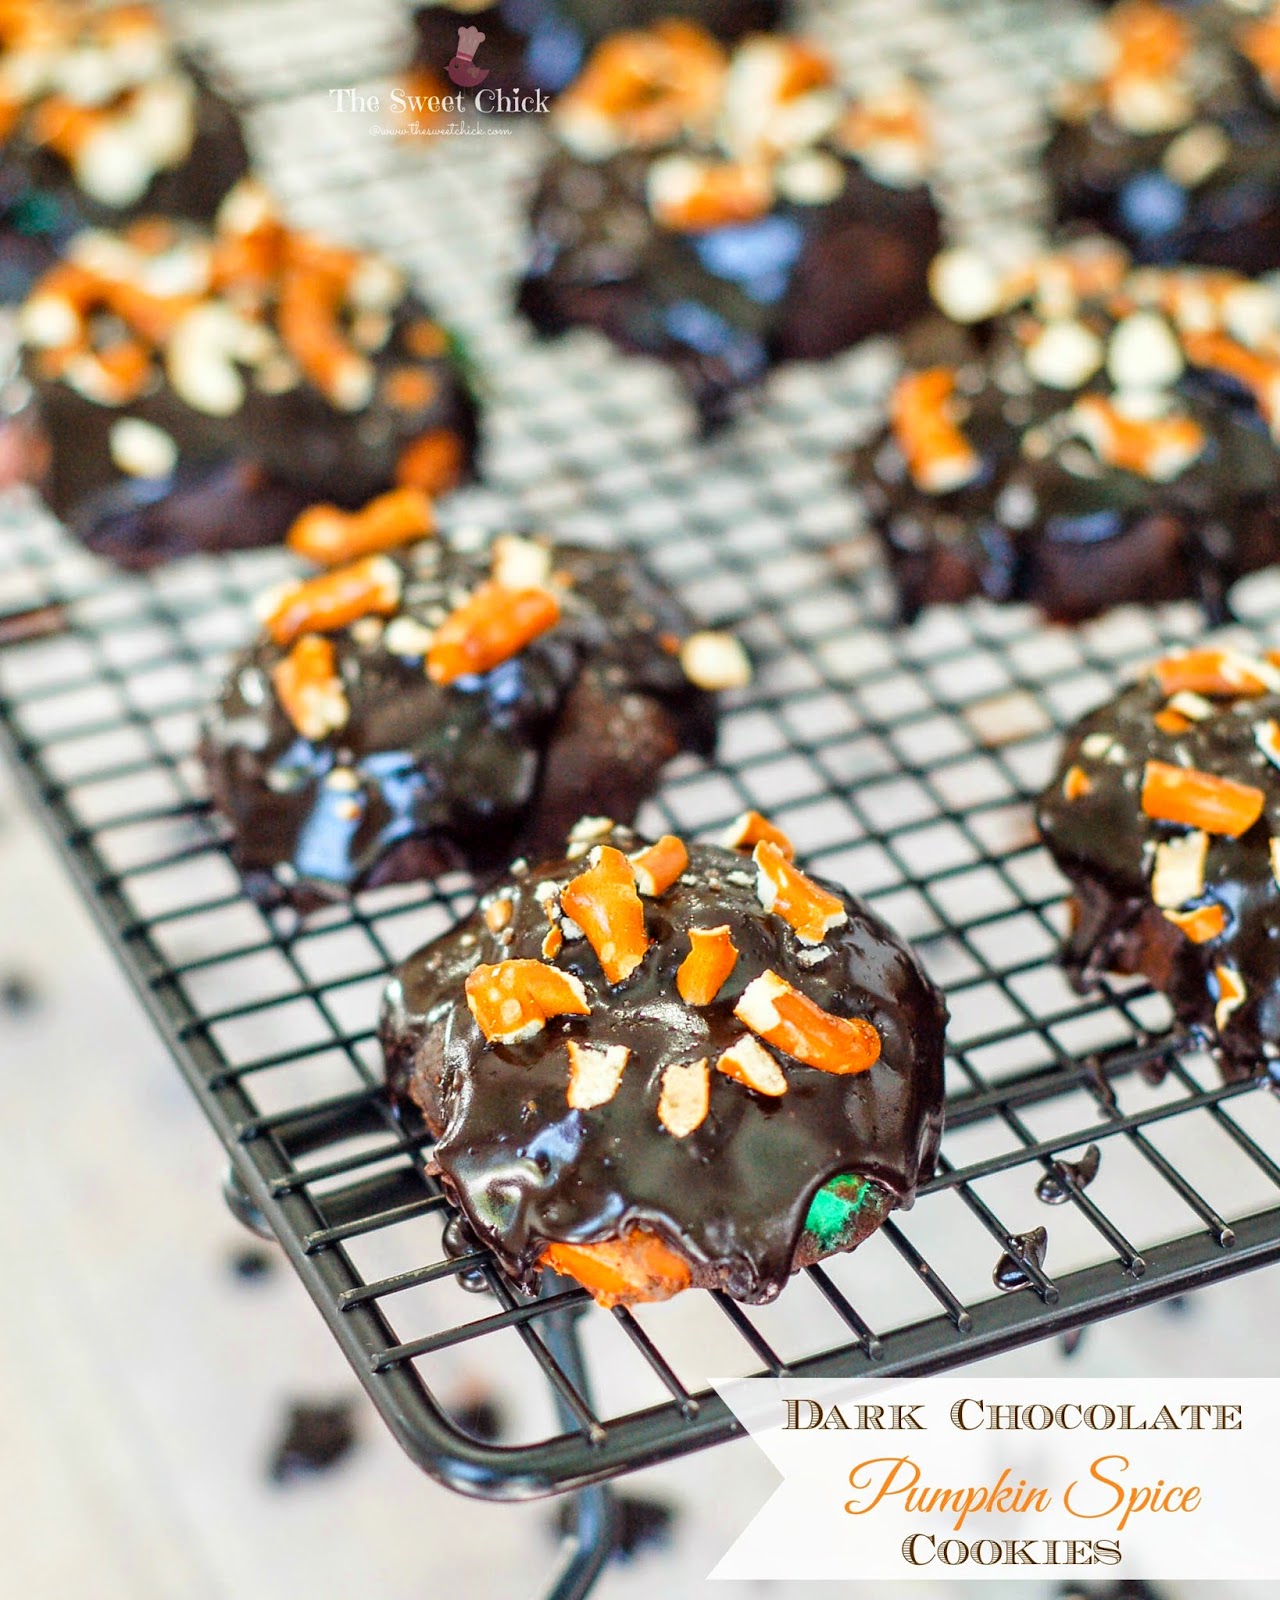 Dark Chocolate Pumpkin Spice Cookies by The Sweet Chick